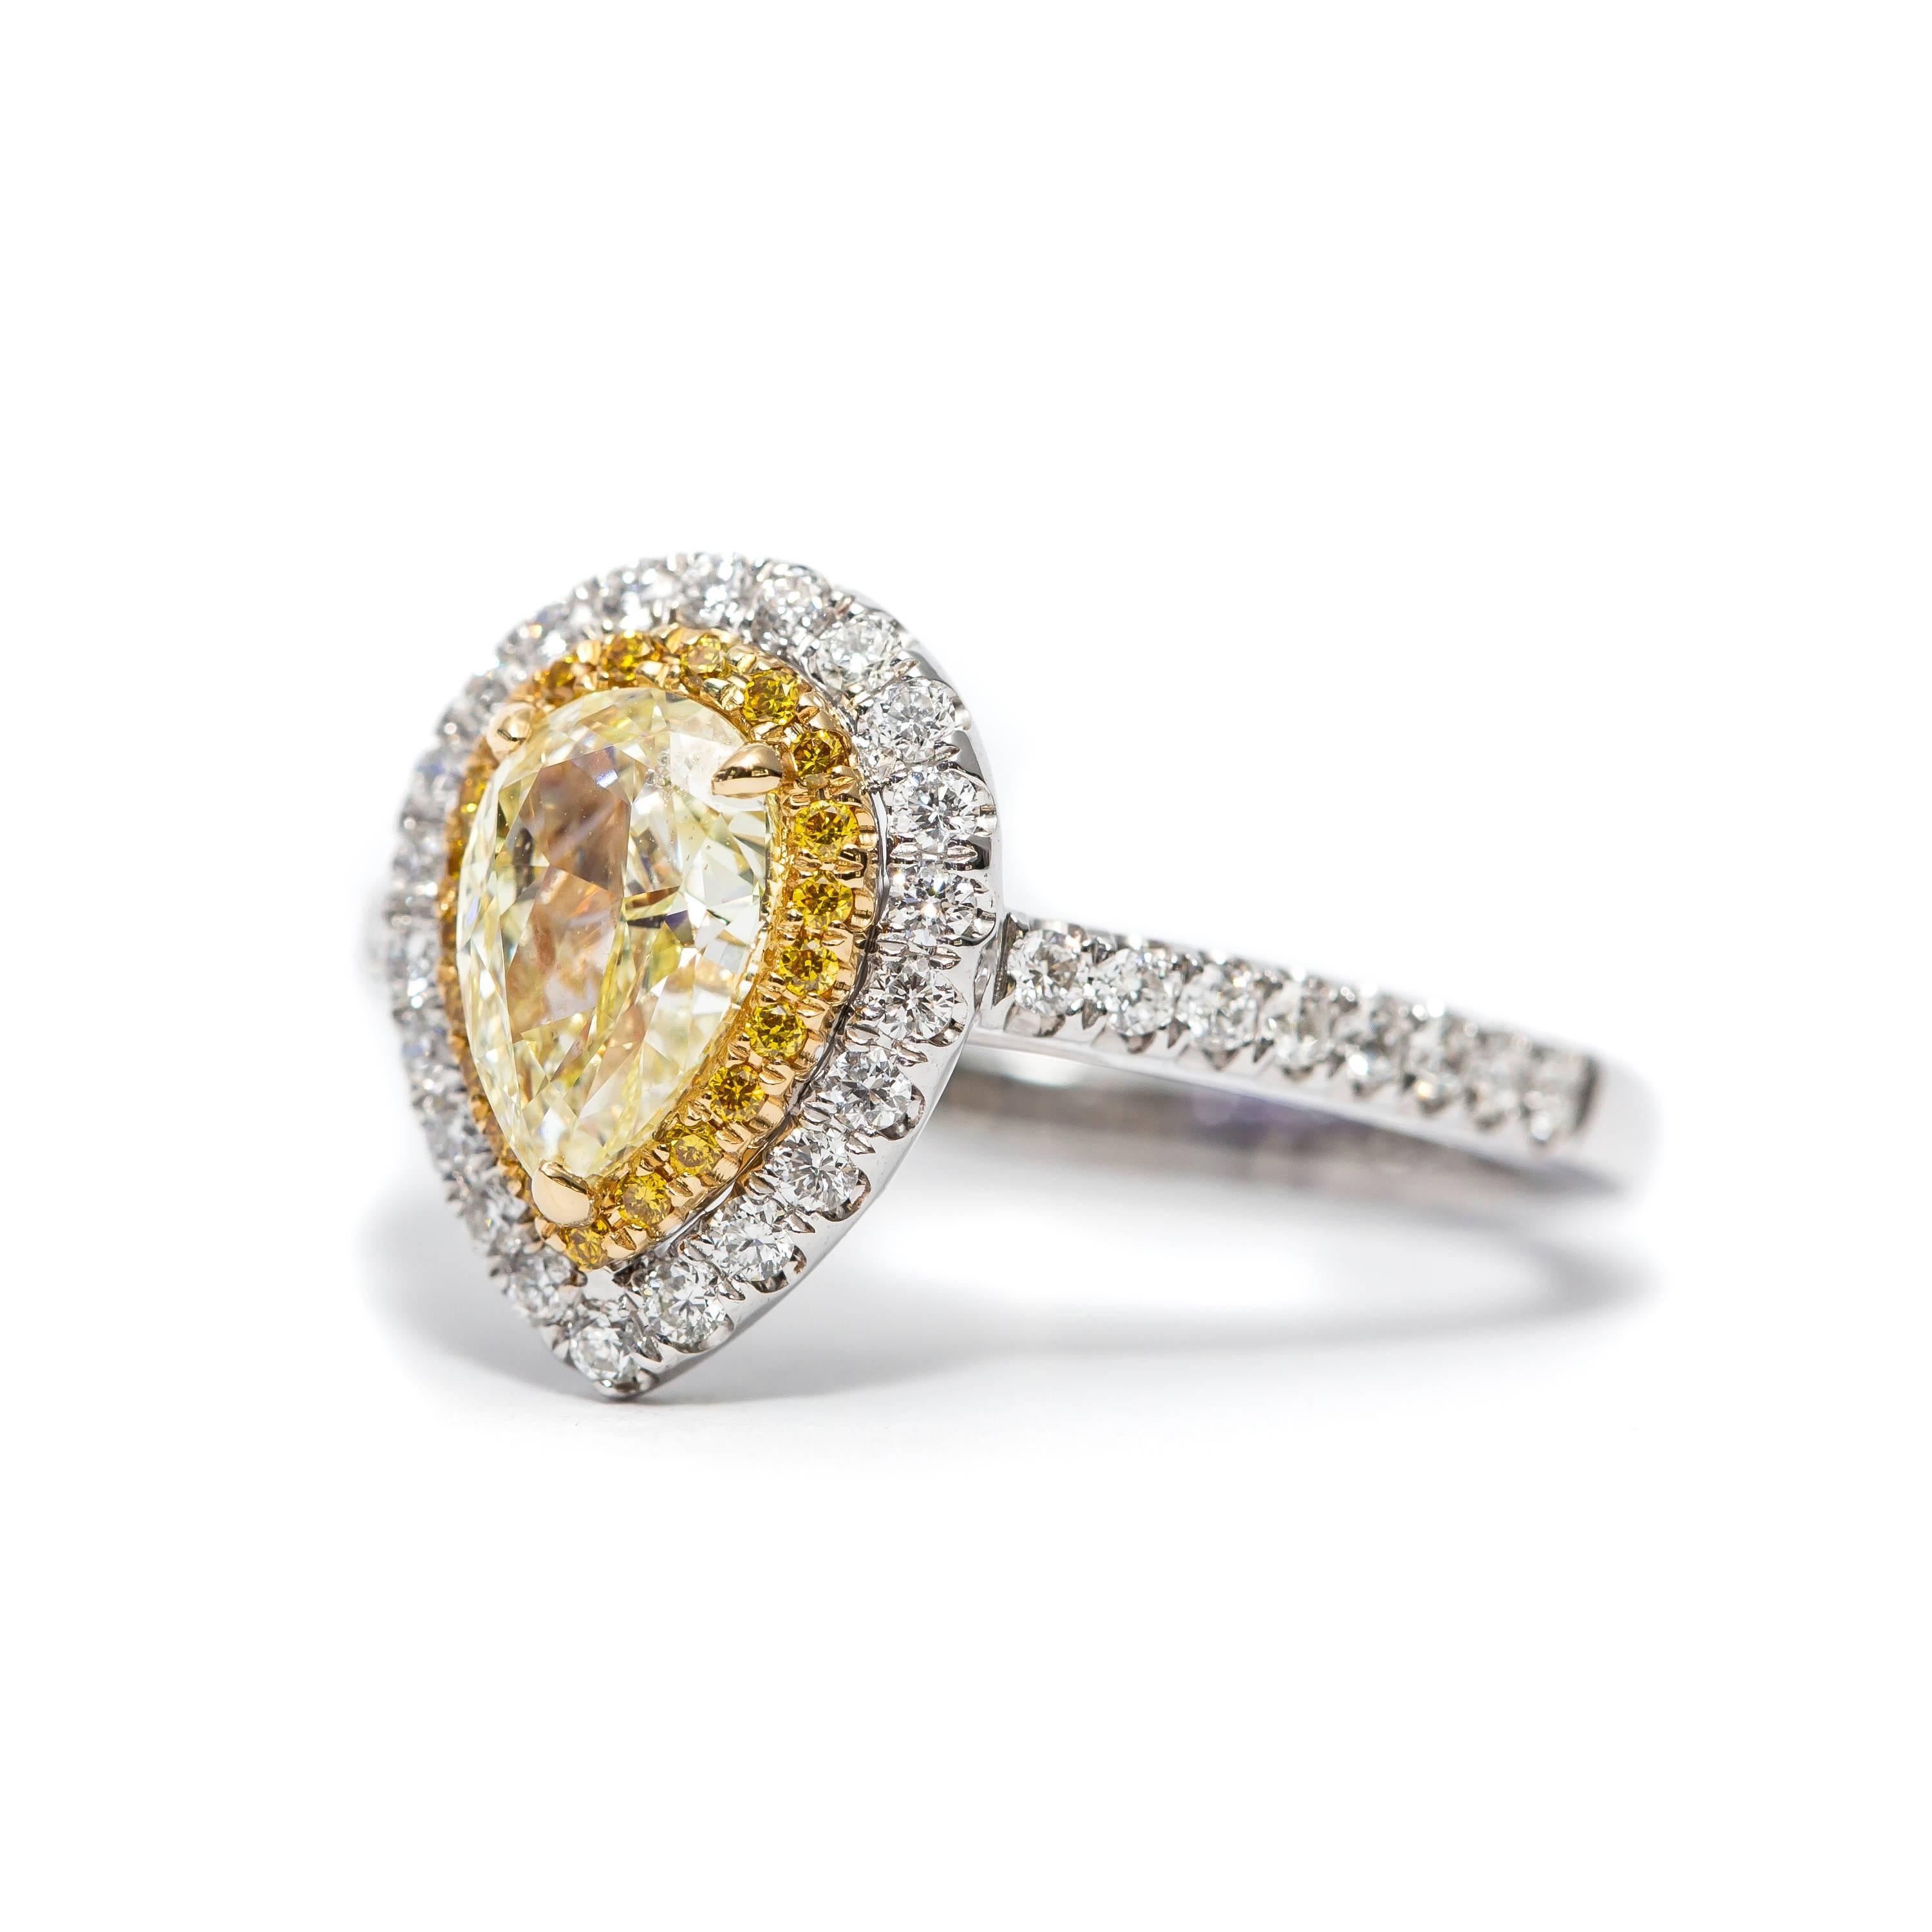 An extremely impressive and bespoke GIA Certified 0.70 - 0.85 ( 7x5 mm) Carat Natural Fancy Yellow Pear Shaped Diamond which is set in the centre of the Ring with Double Halo, the inner halo features 0.08 Carat Round Fancy Yellow Diamonds with 0.38